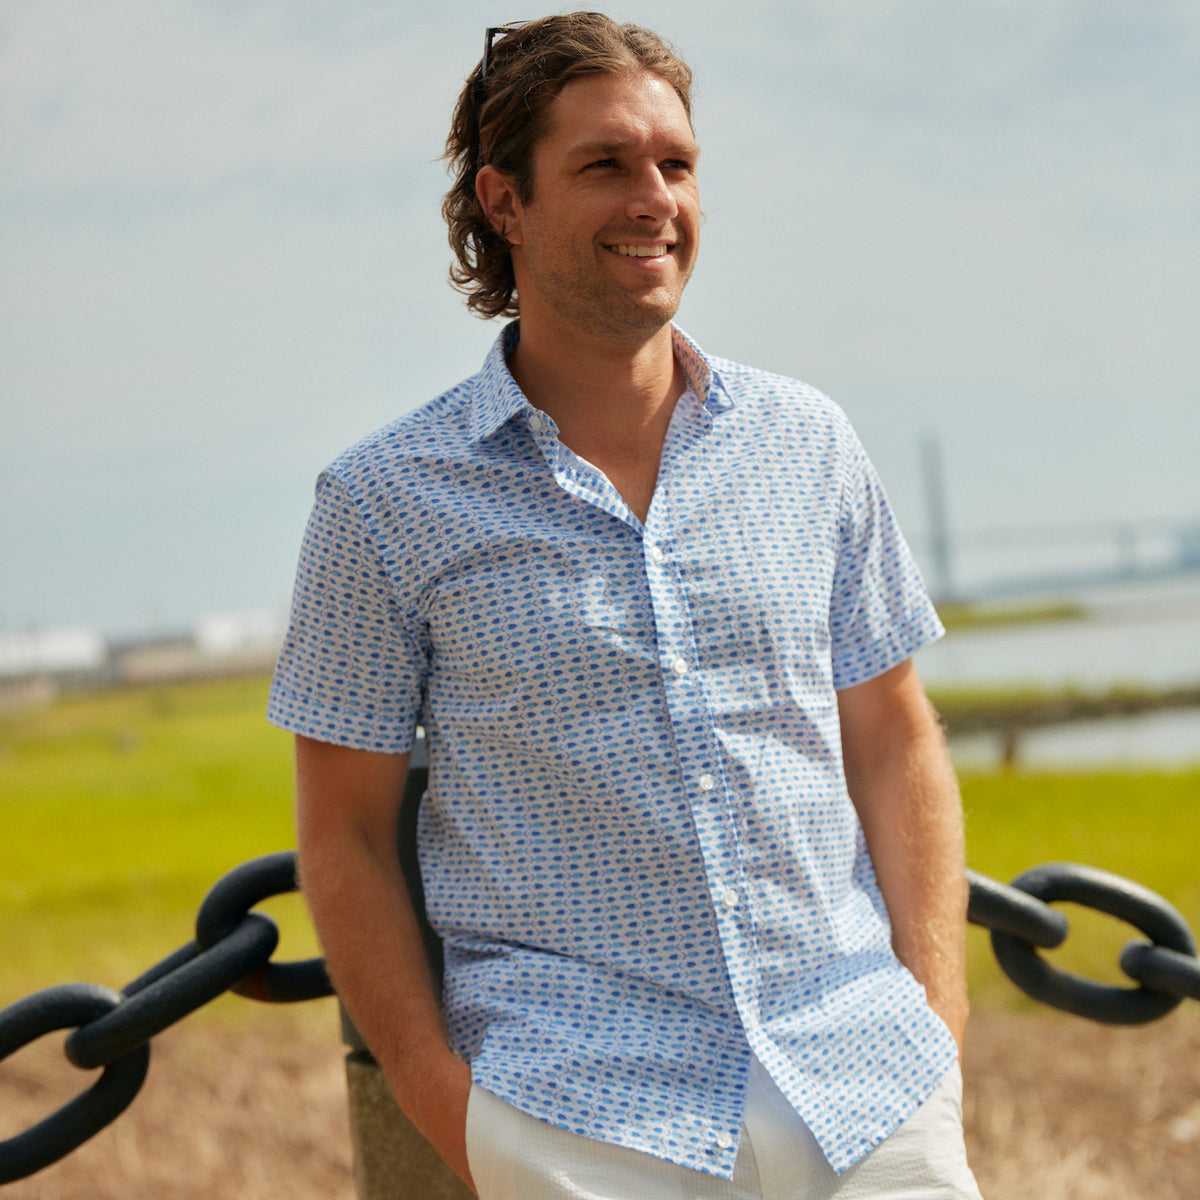 The fish are biting and skies are blue!  By the pond is where this shirt wants to be.   100% Cotton • Spread Collar • Short Sleeve • Chest Pocket • Machine Washable • Made in Italy